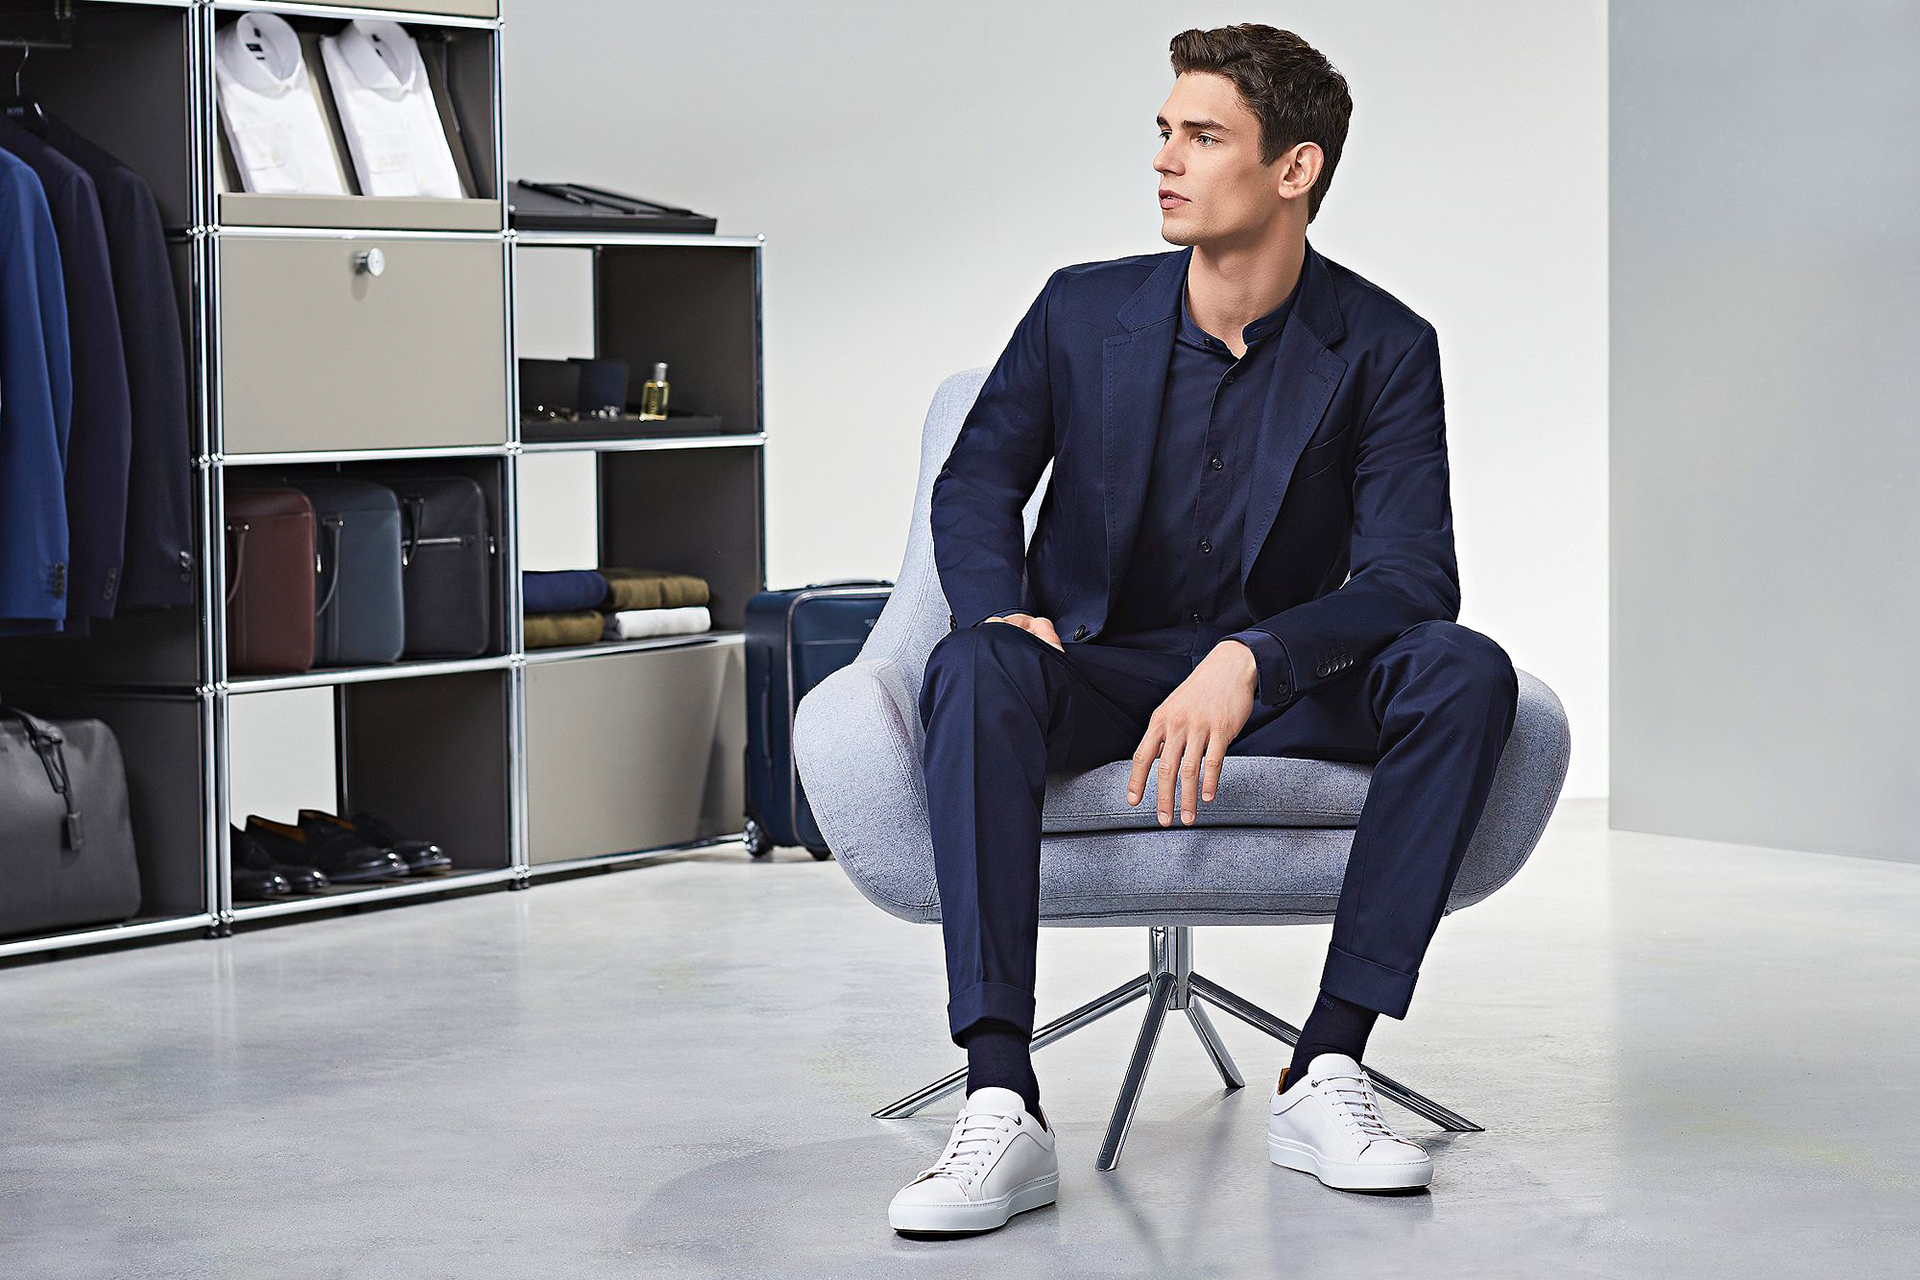 Wearing a navy suit with white sneakers